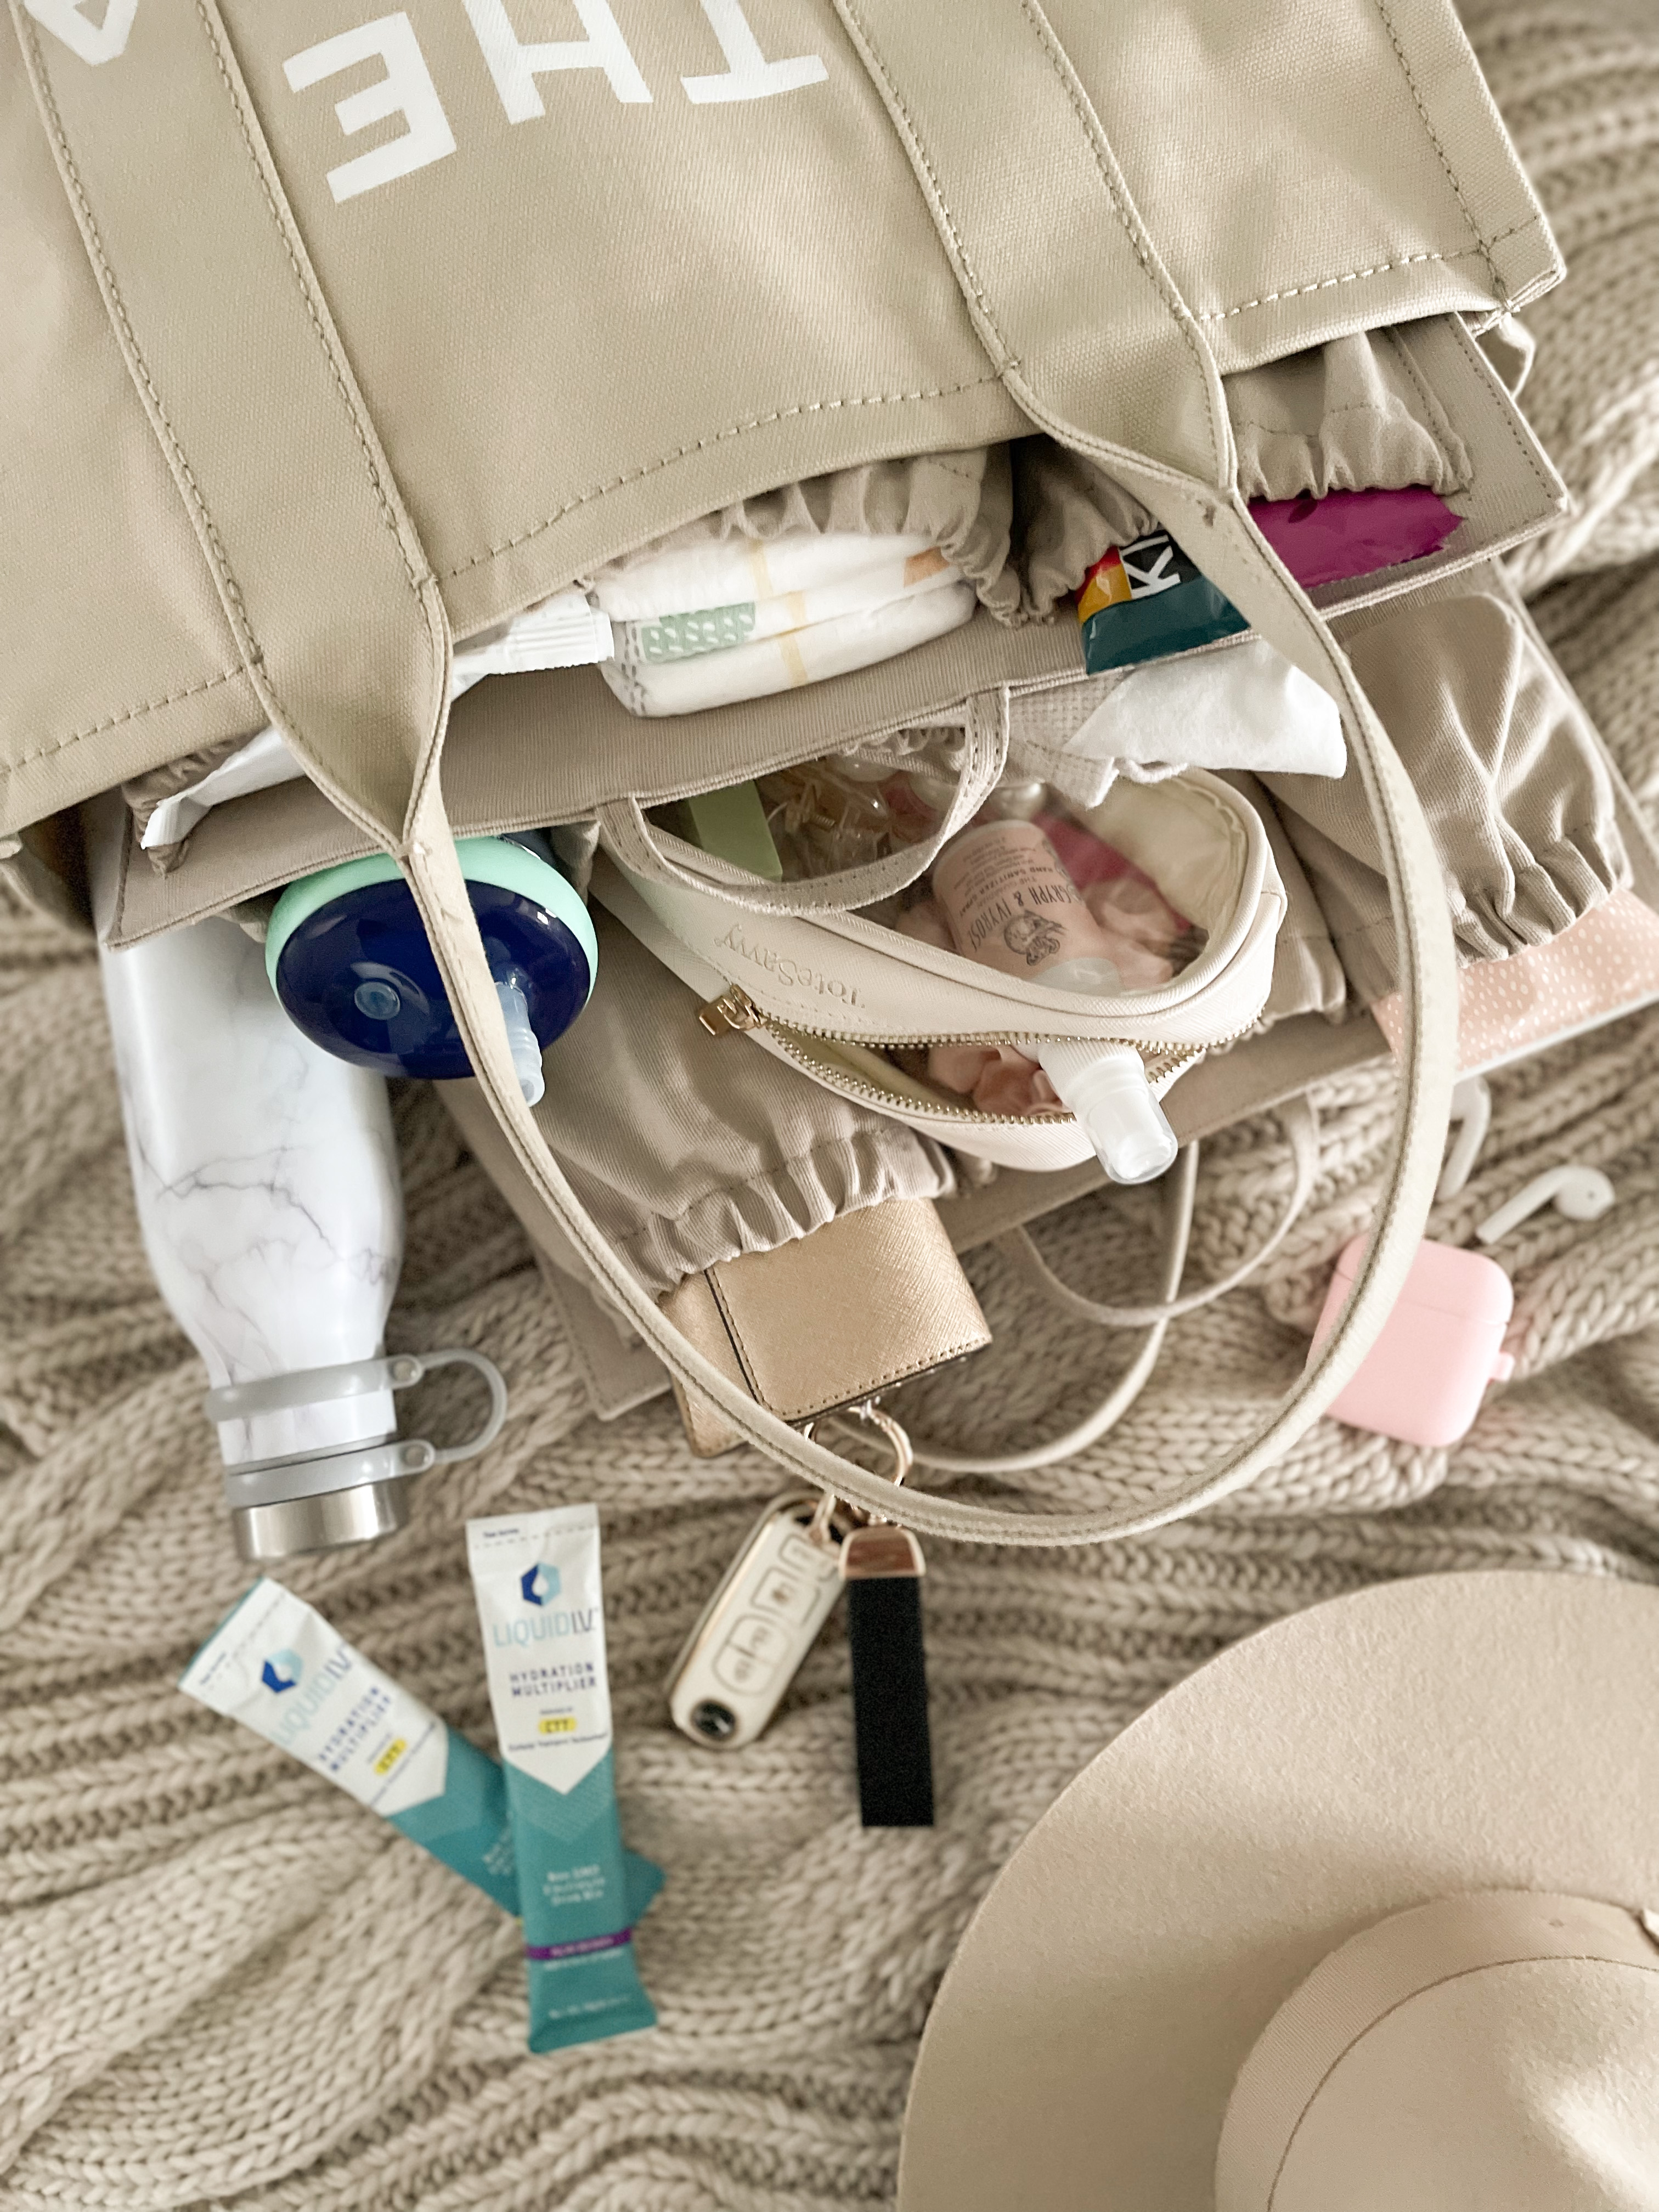 WHAT'S IN MY BAG, MOM EDITION